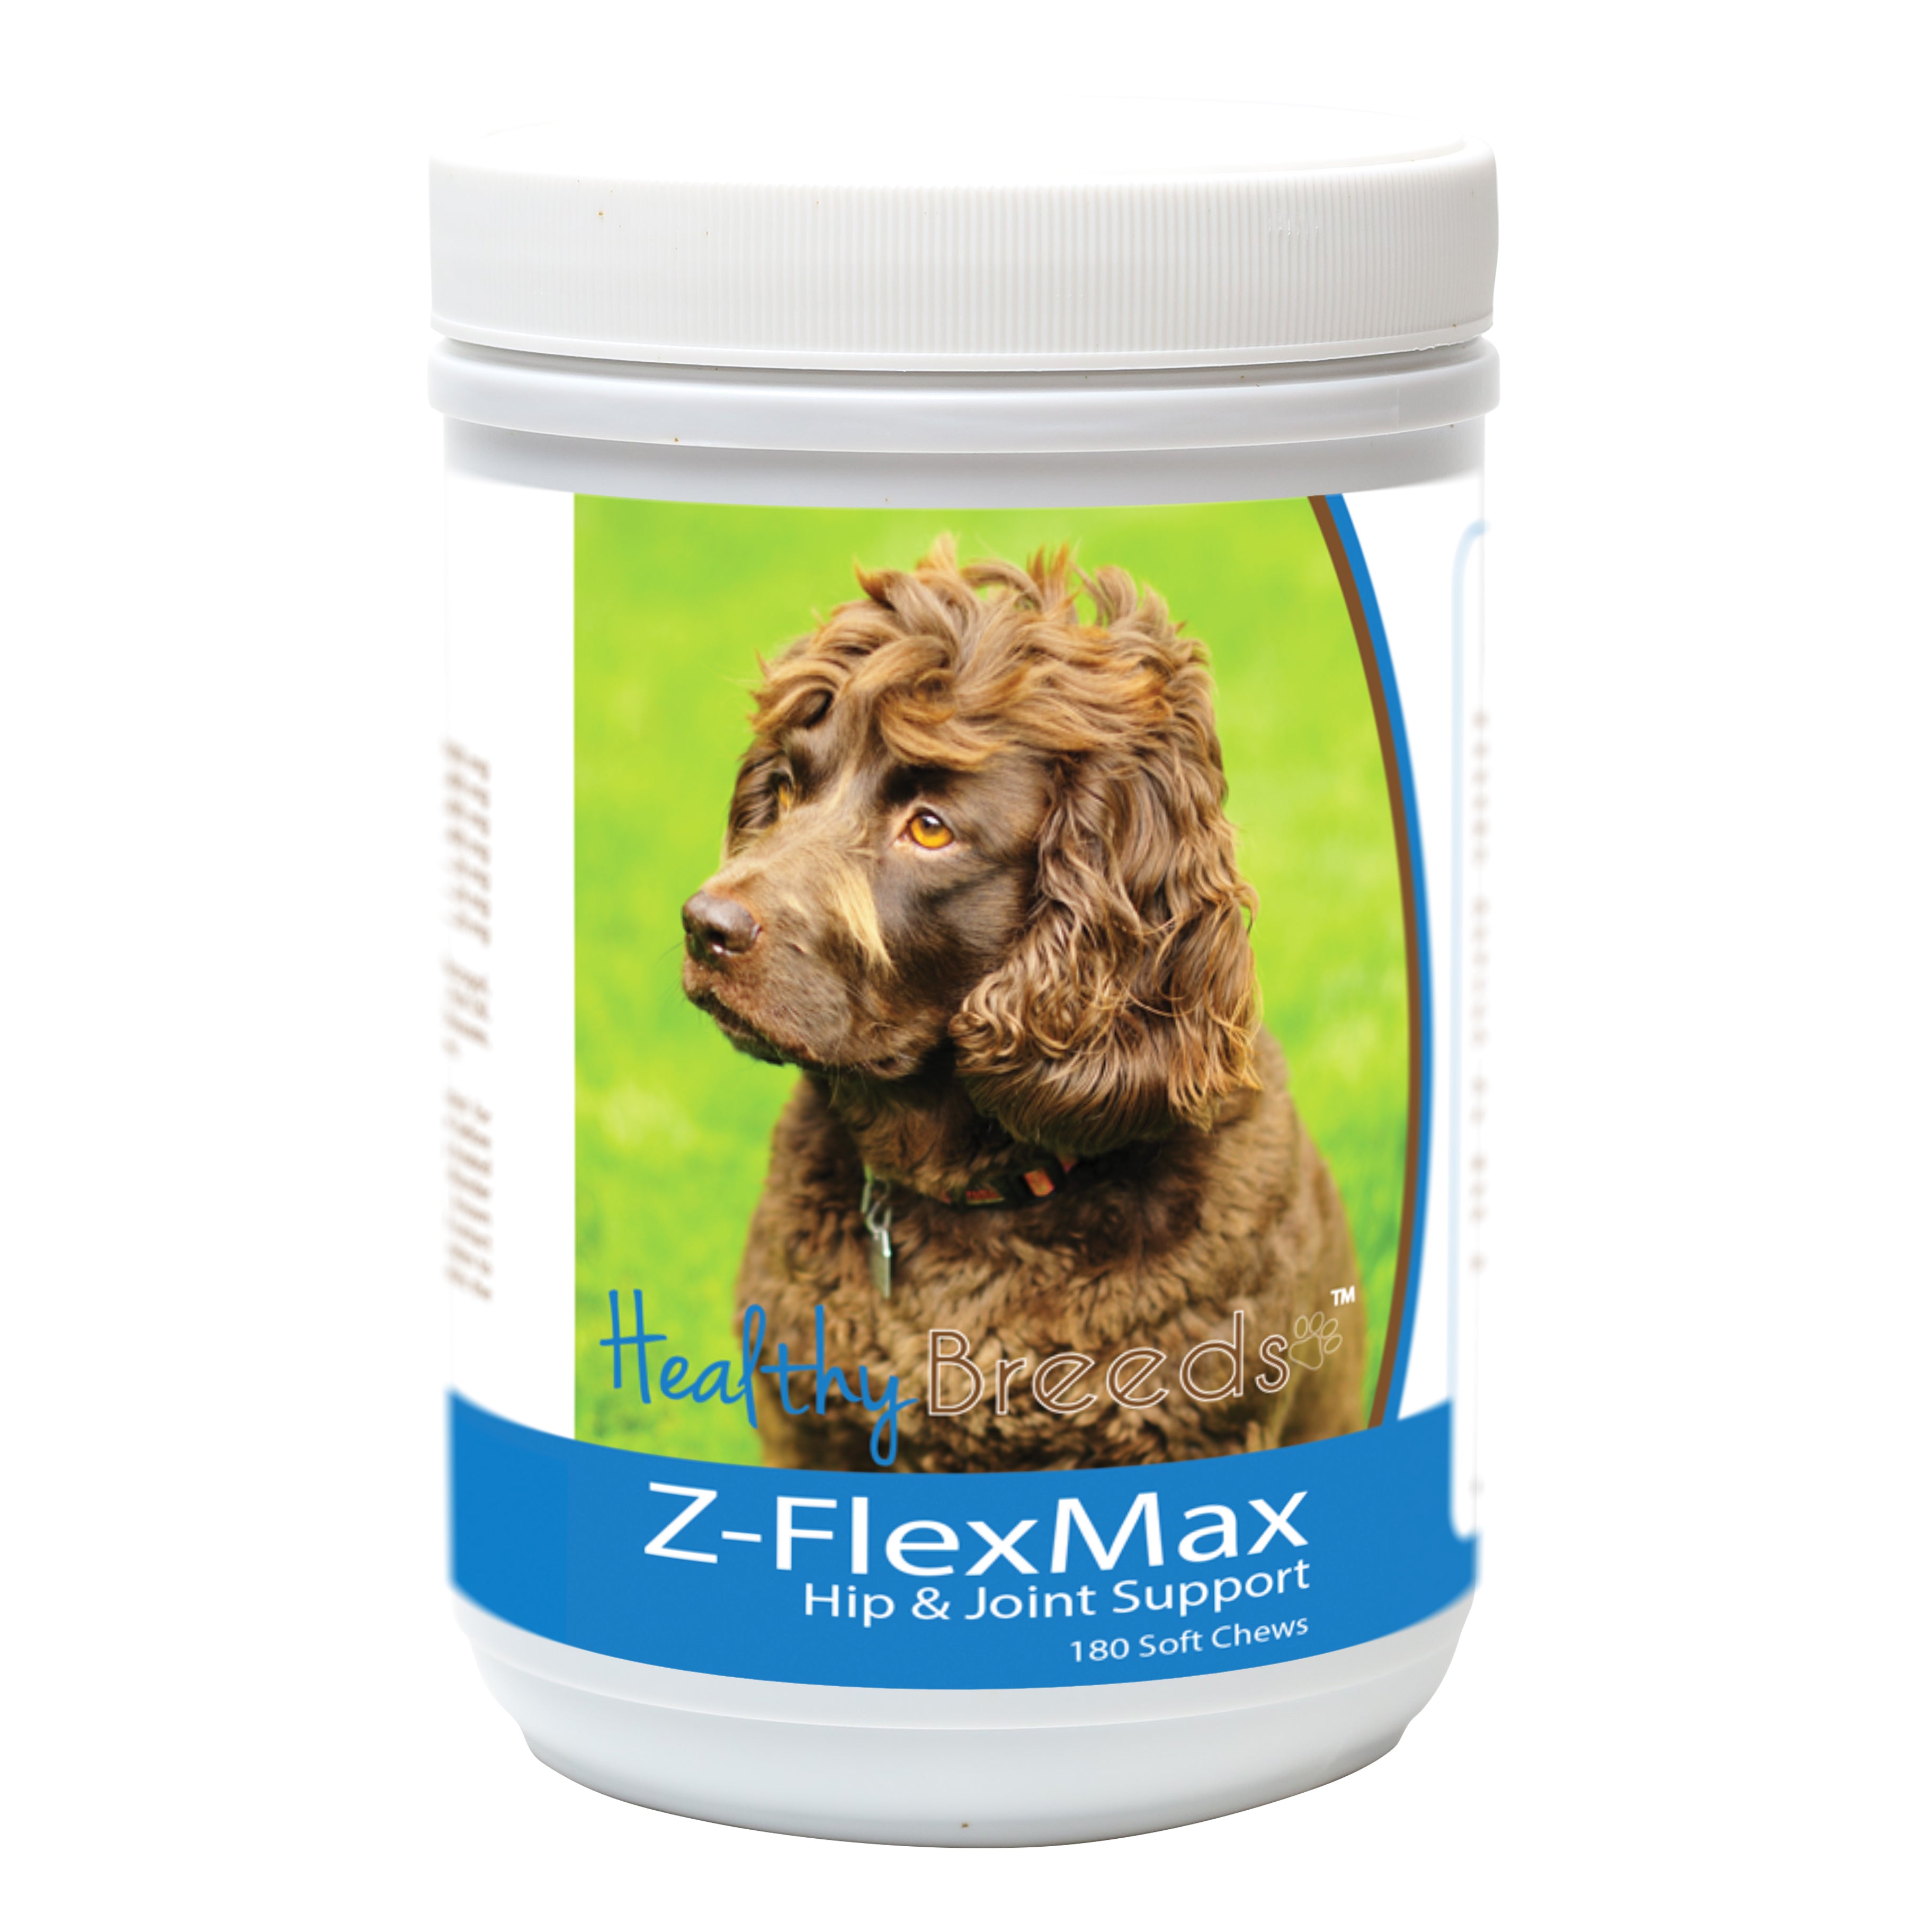 Boykin Spaniel Z-Flex Max Dog Hip and Joint Support 180 Count